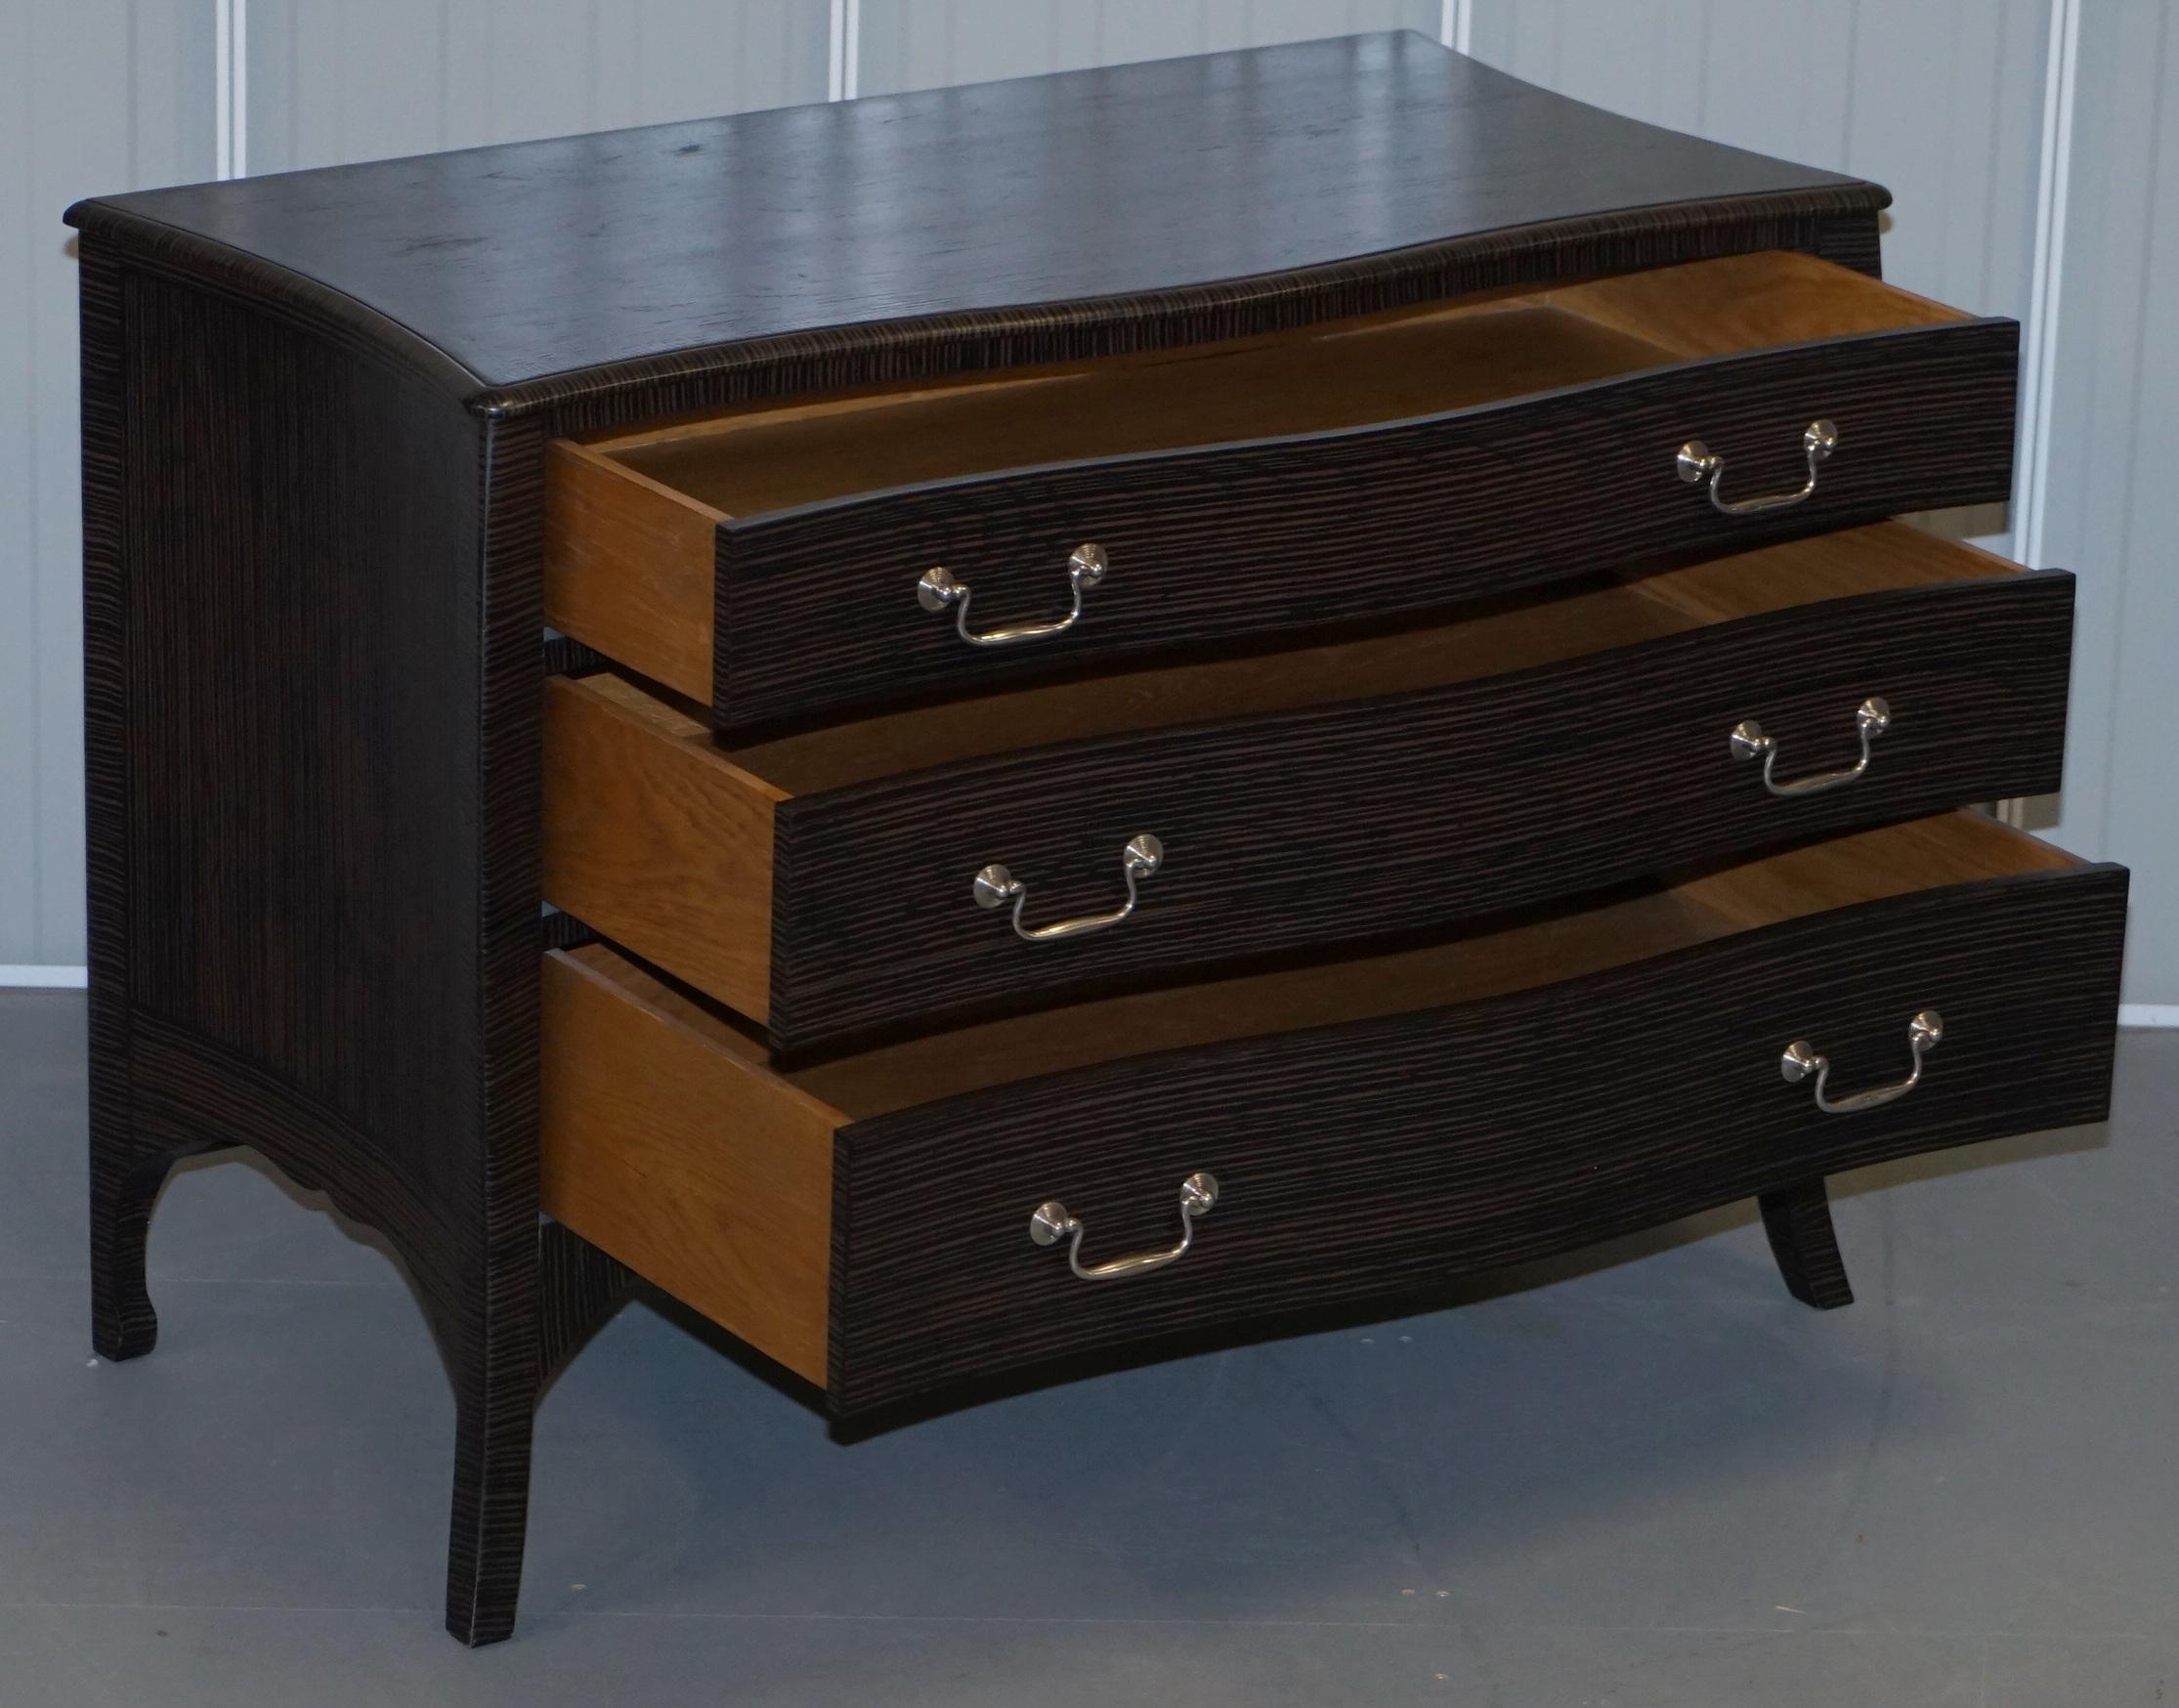 Stunning Julian Chichester Chelsea London Serpentine Fronted Chest of Drawers 2